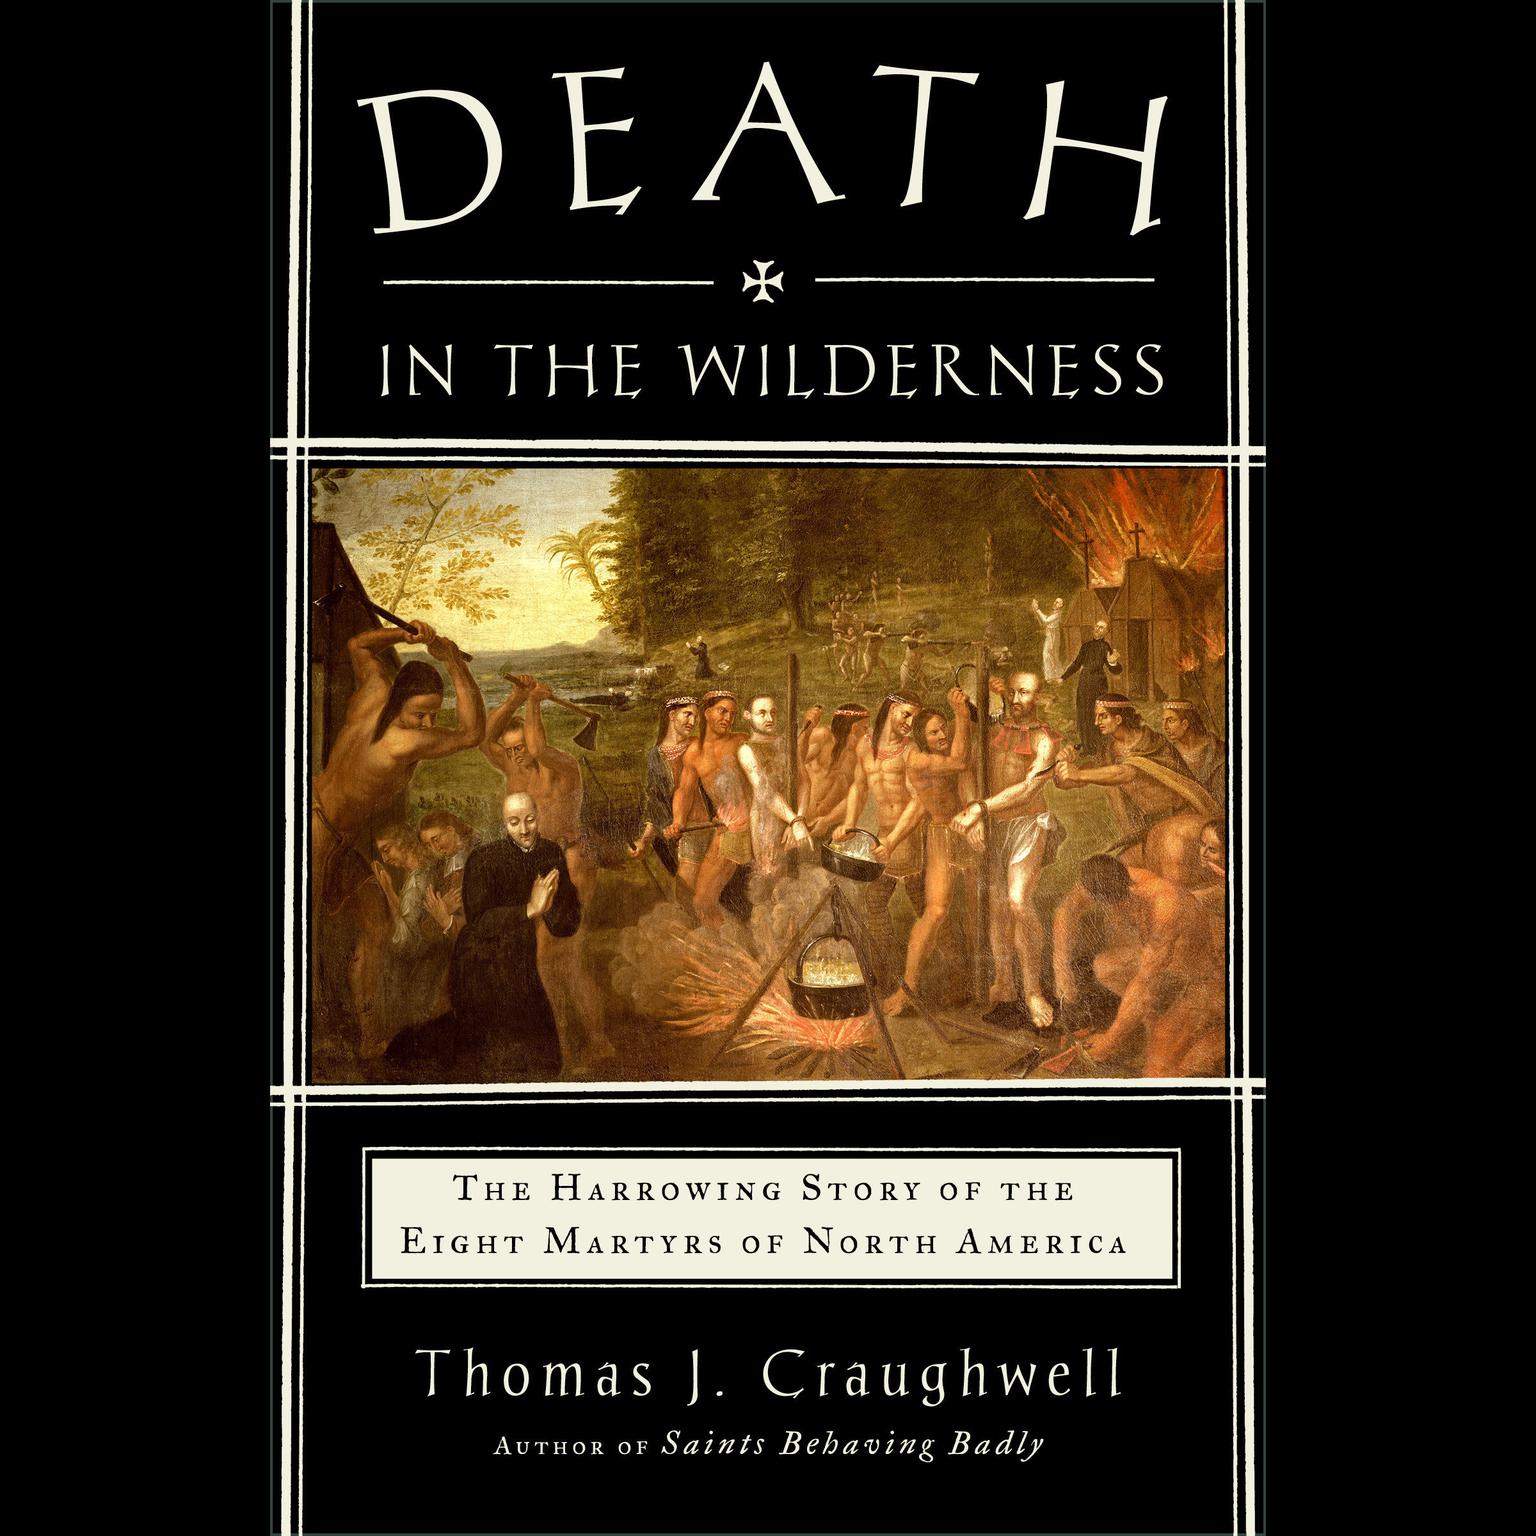 Death in the Wilderness: The Harrowing Story of the Eight Martyrs of North America Audiobook, by Thomas J. Craughwell